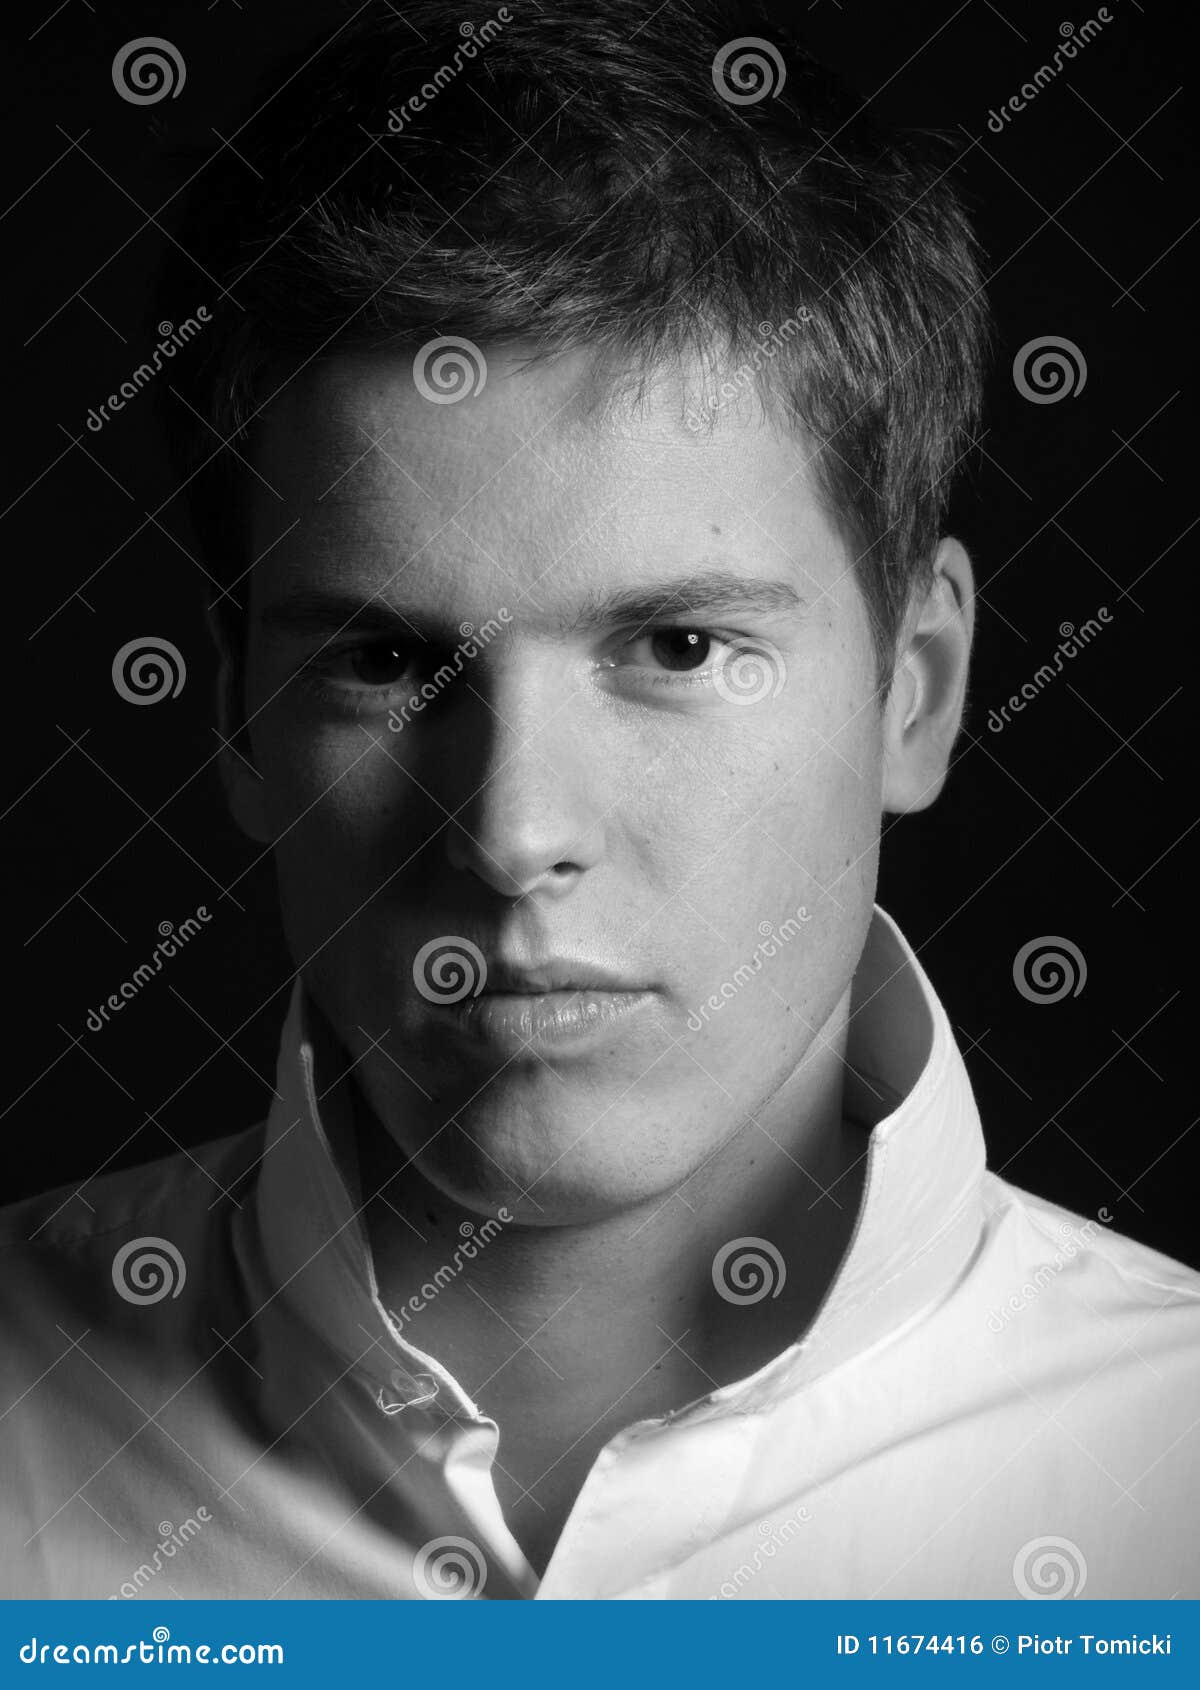 Handsome young male model stock photo. Image of people - 11674416